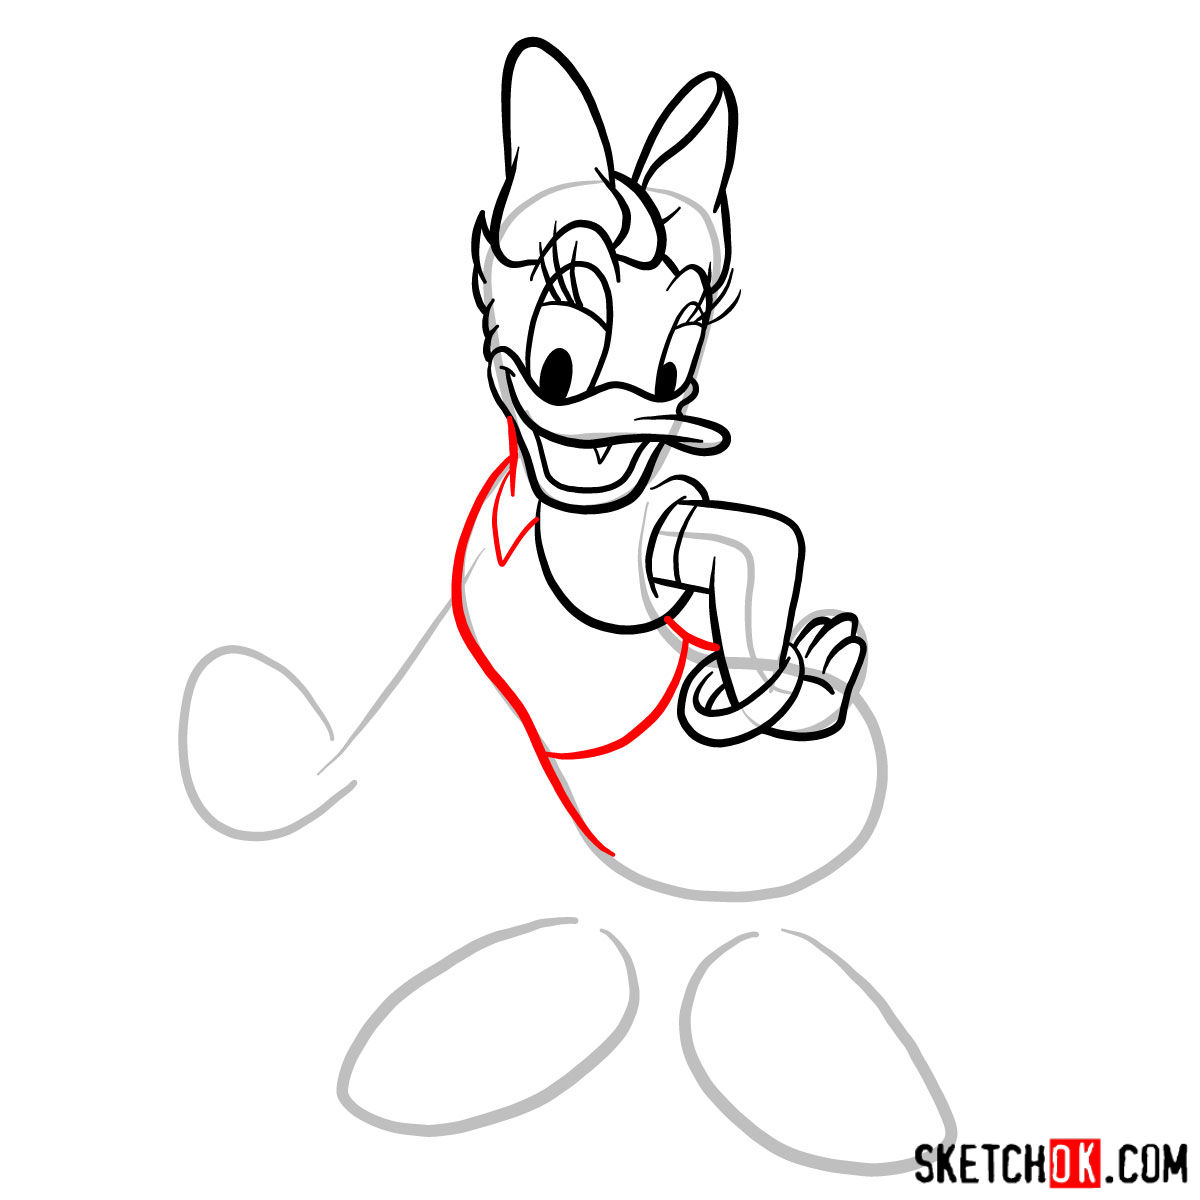 How to draw Daisy Duck - step 07